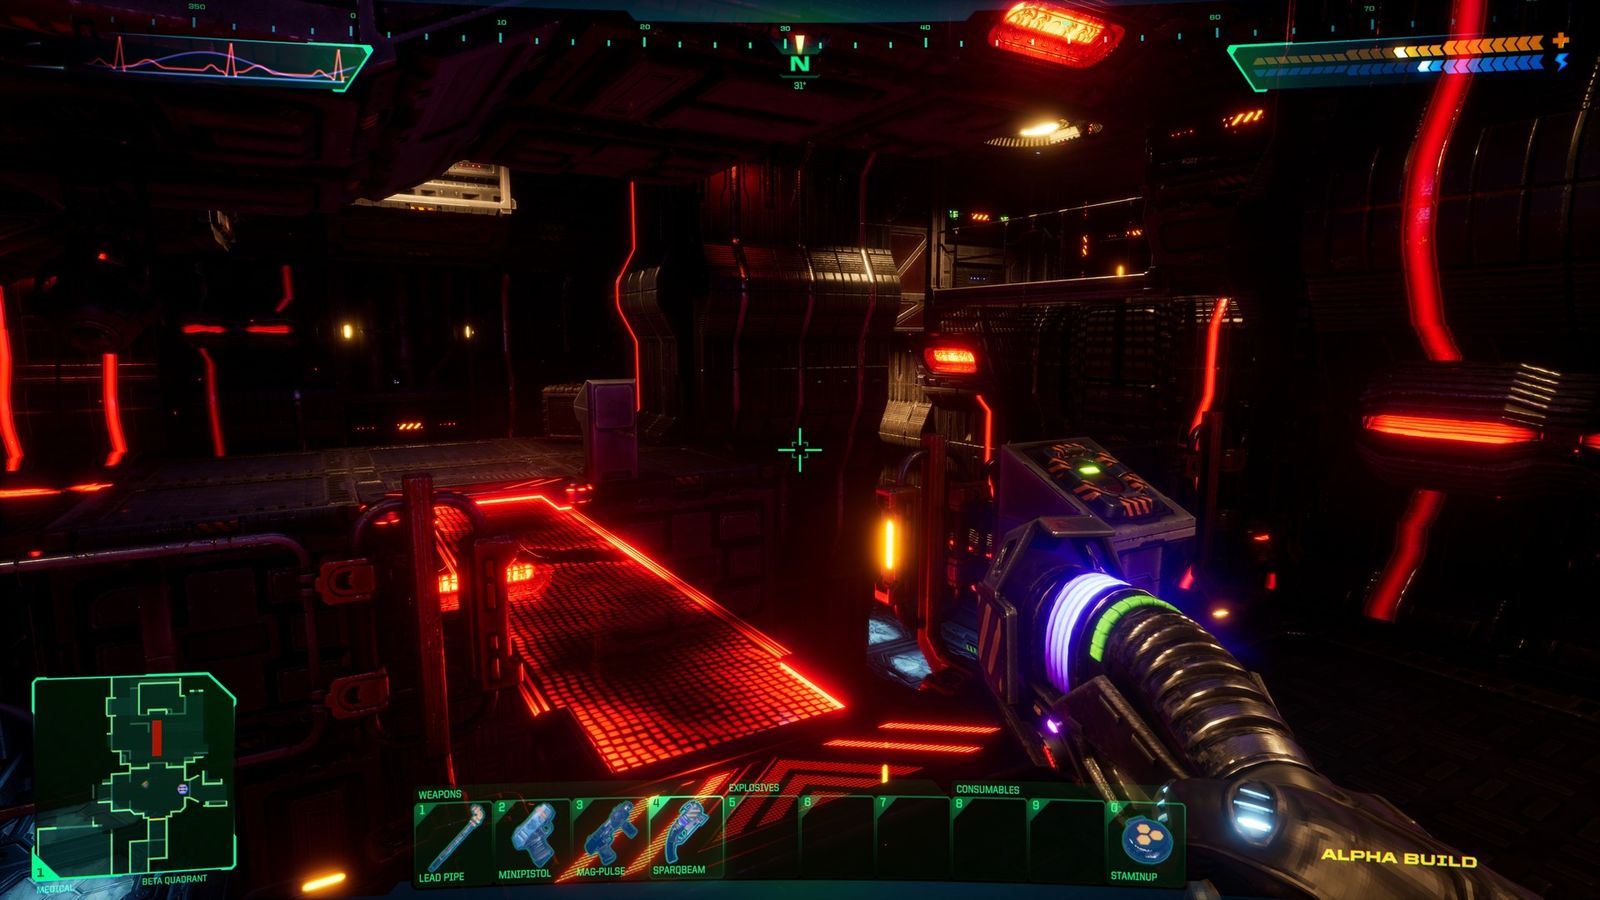 System Shock Remake: Release apparently postponed to March 2023 - News